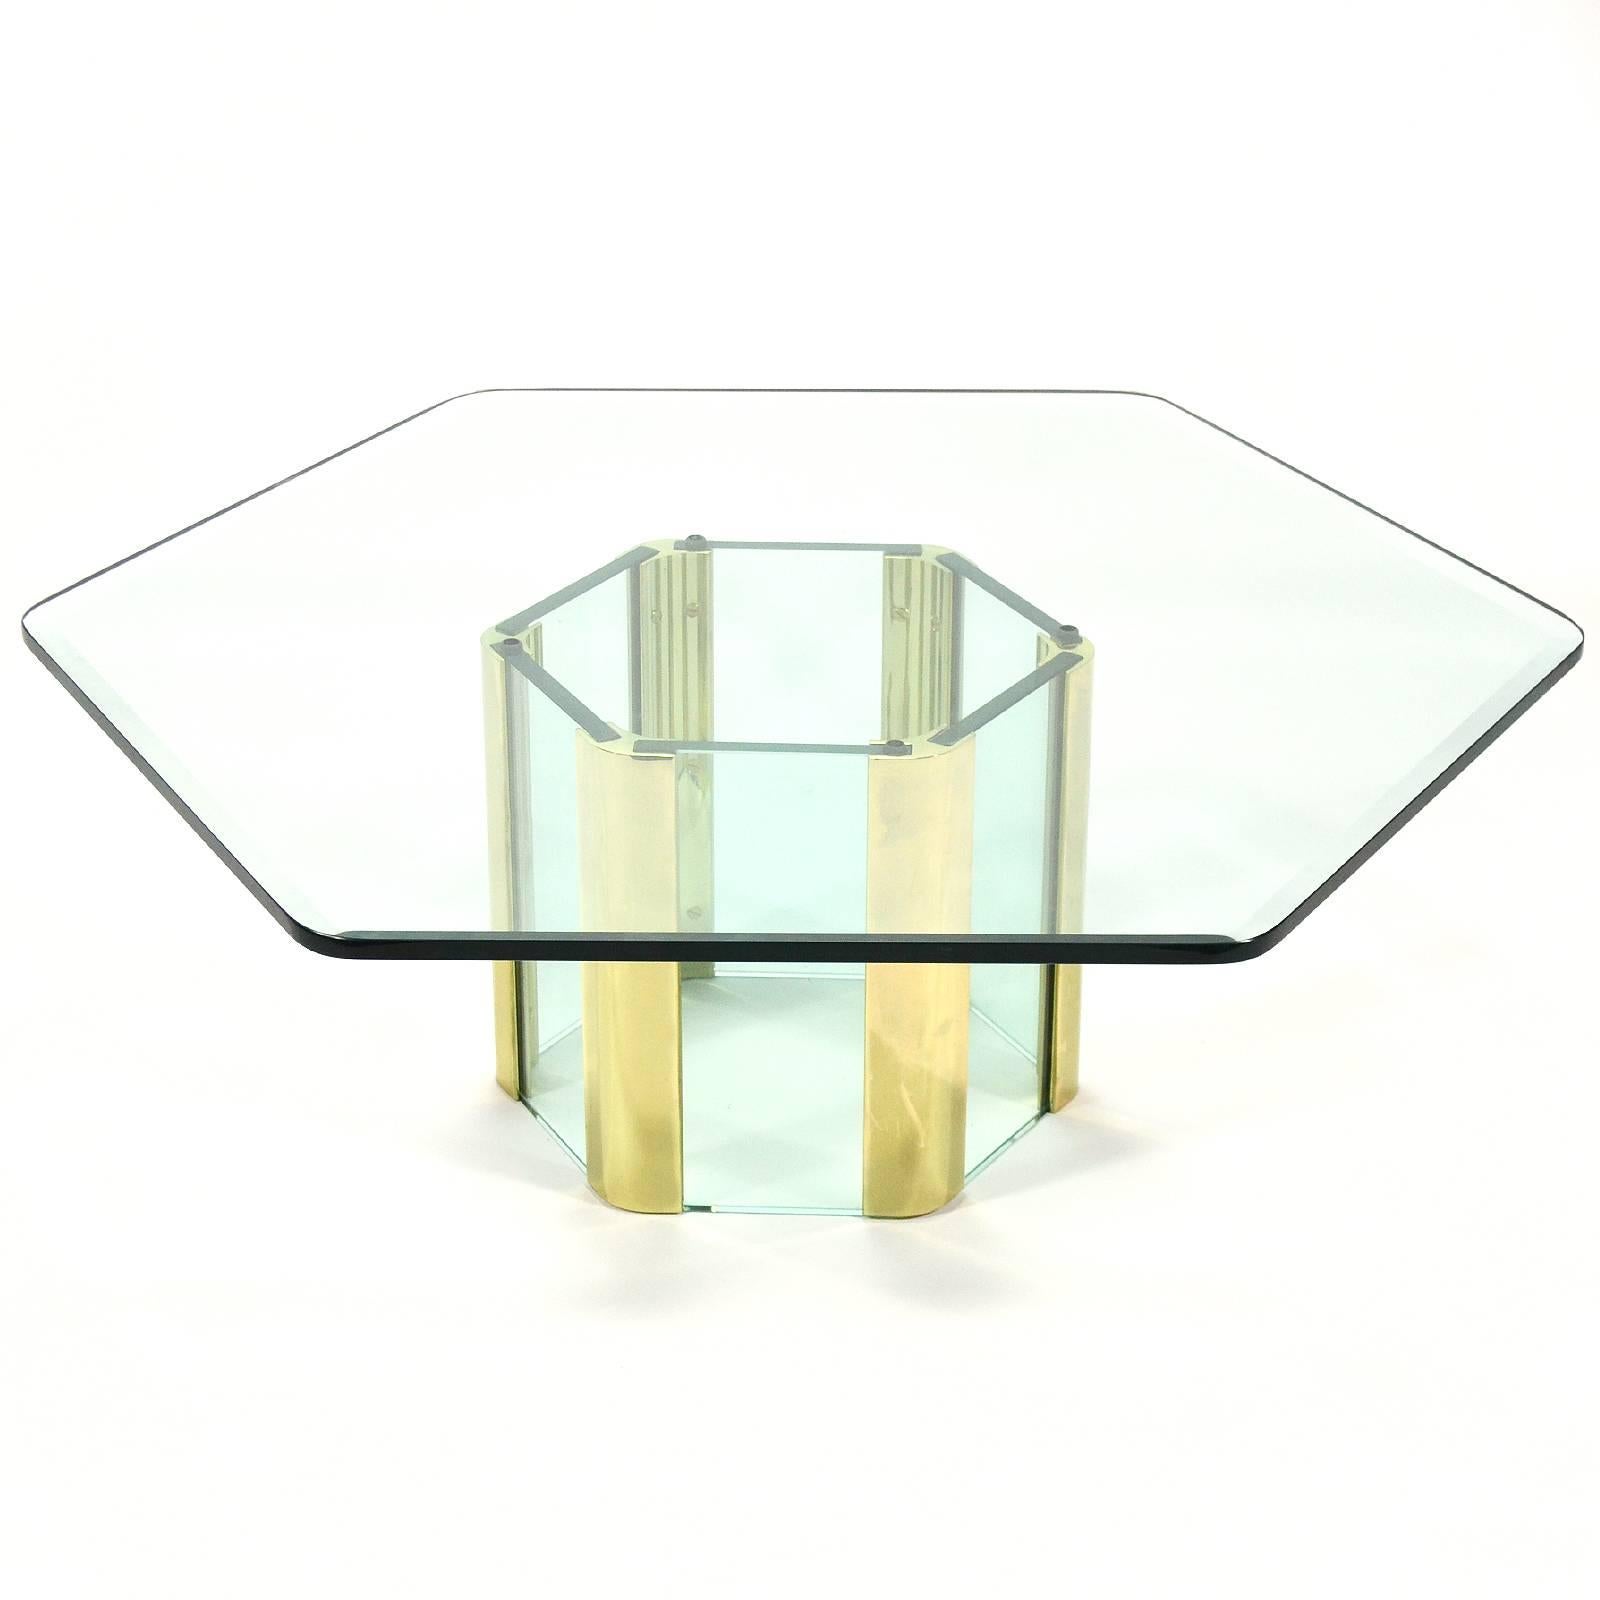 A beautiful design which is both substantial and visually light with its generous use of glass. This hexagonal cocktail table has a base of thick glass connected with the distinctive brass connecting elements. It supports a nicely detailed top with